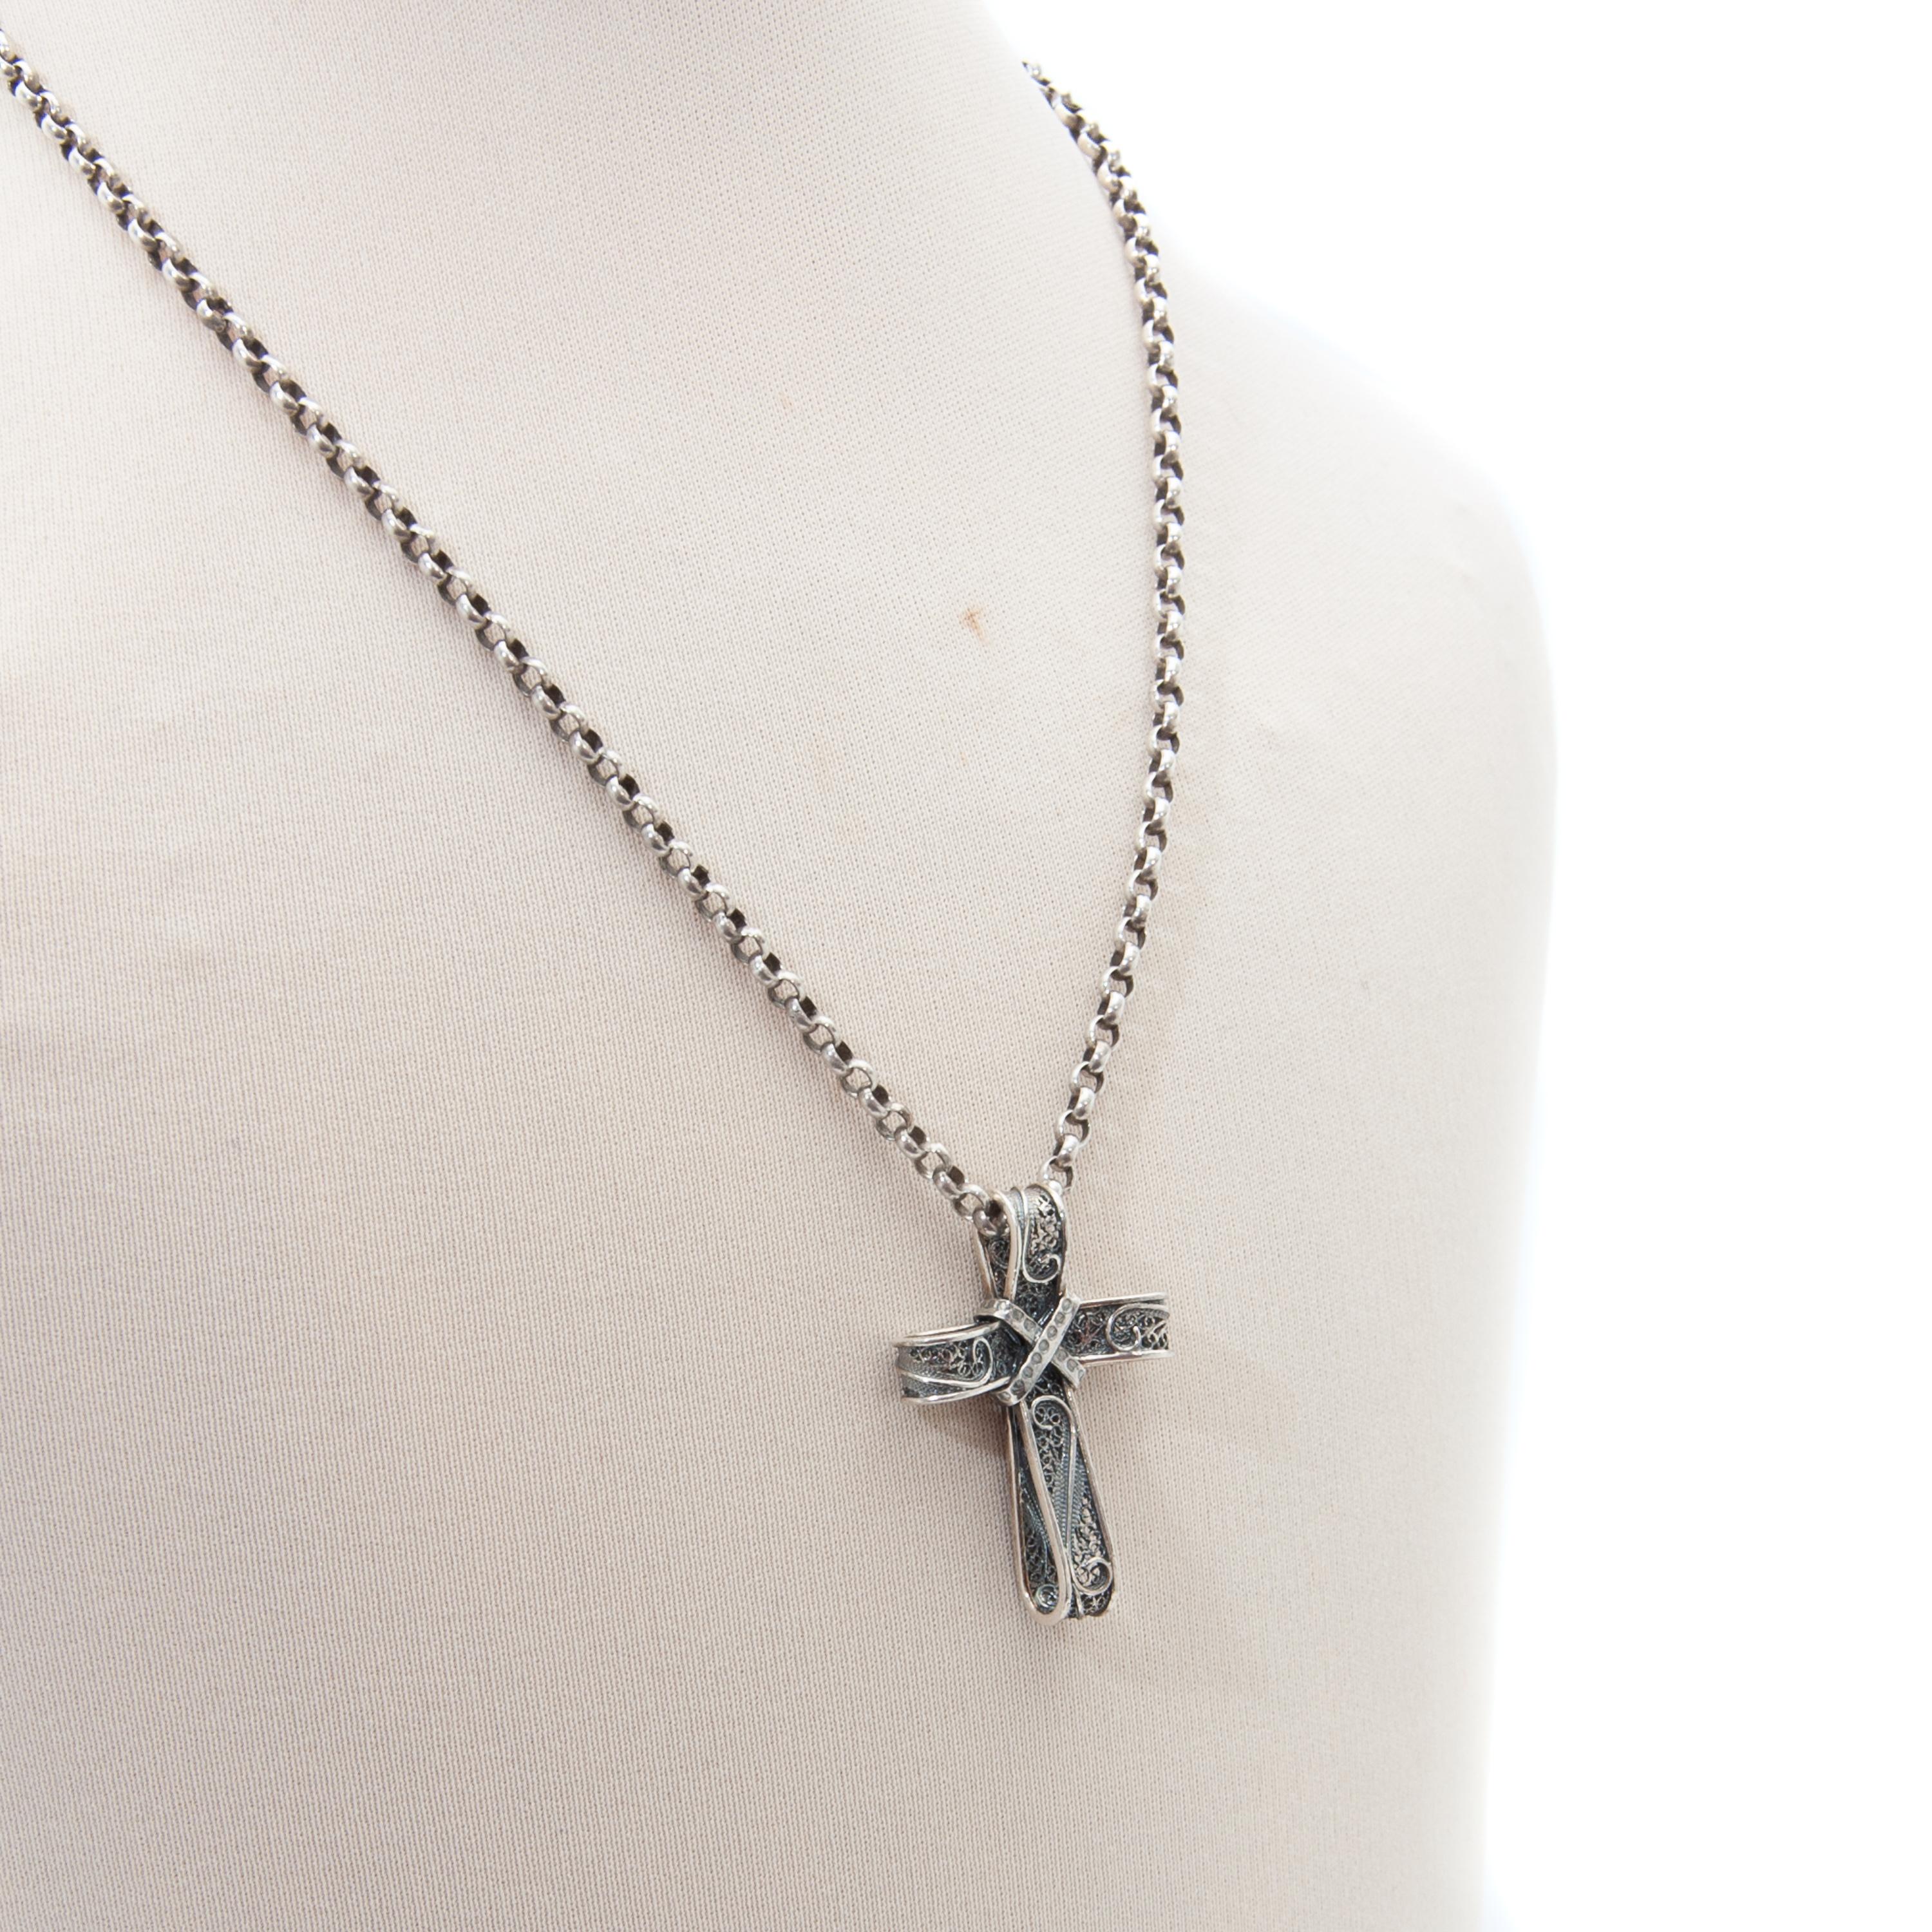 A gorgeous early 20th century cross pendant made of silver. The cross consists of filigree wire work, which is finely crafted by hand into this lovely religious pendant. The edge of the cross is made of smooth silver. The pendant comes without the